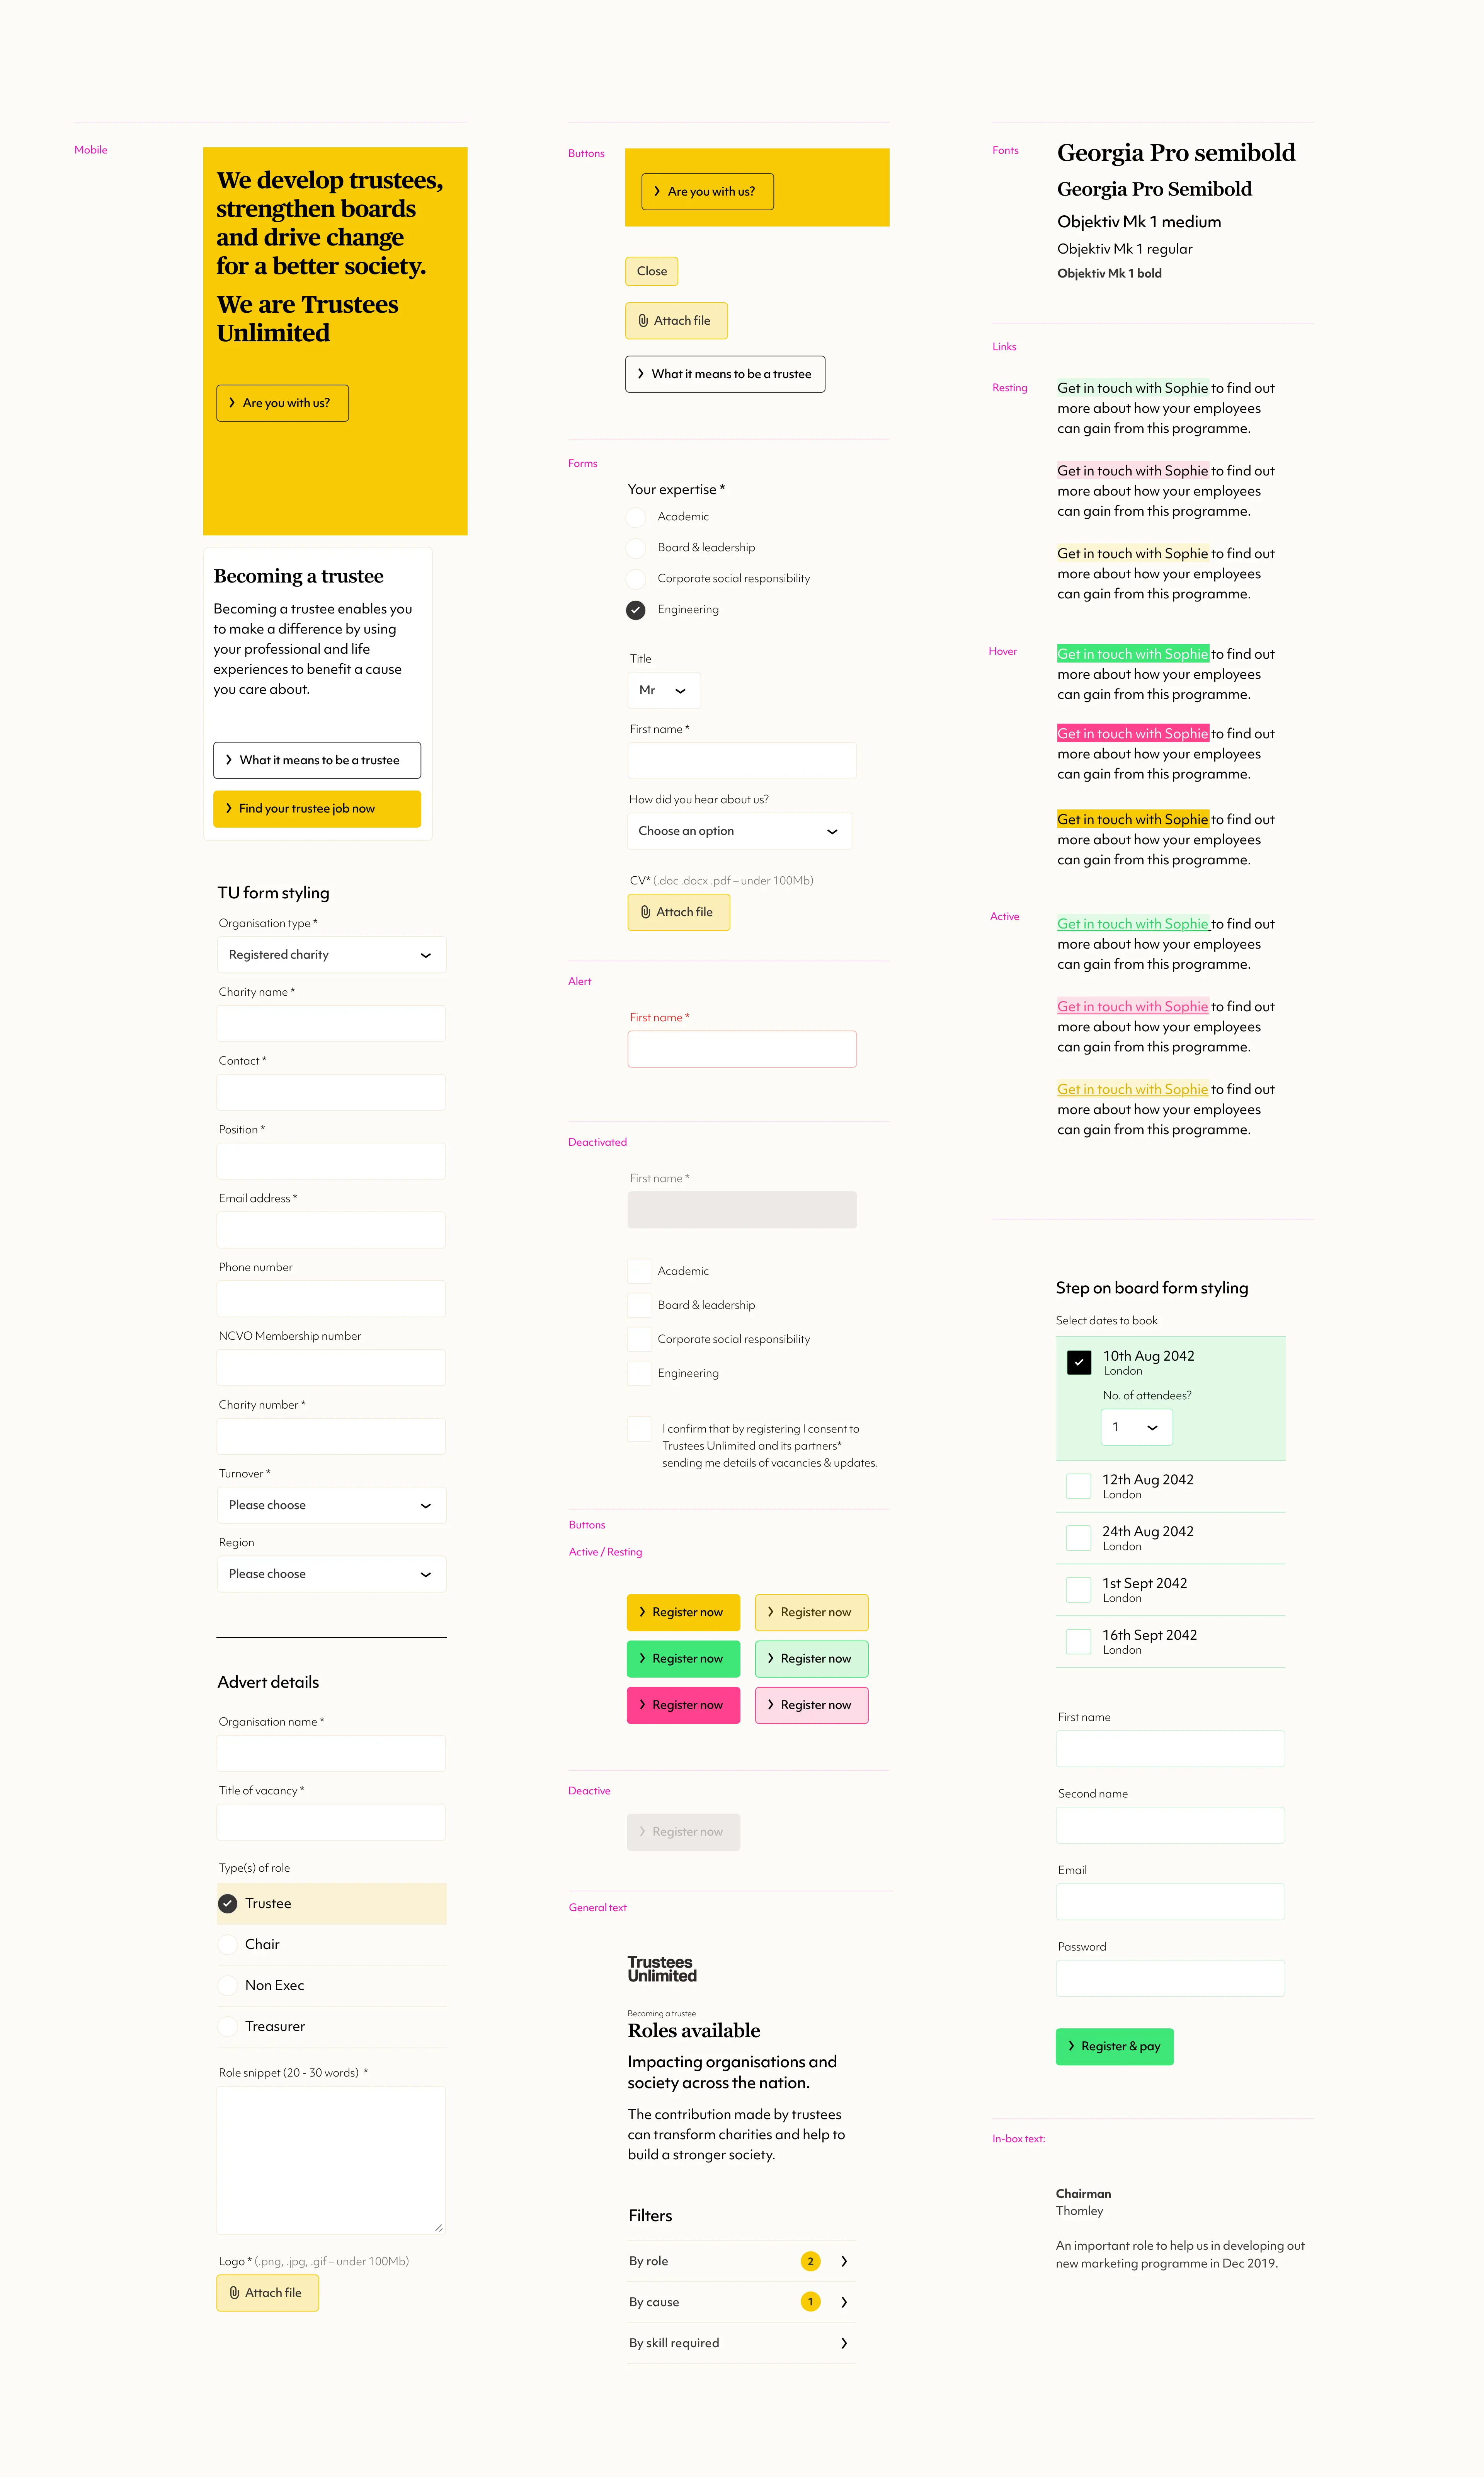 Trustees Unlimited - Design style Guide sample